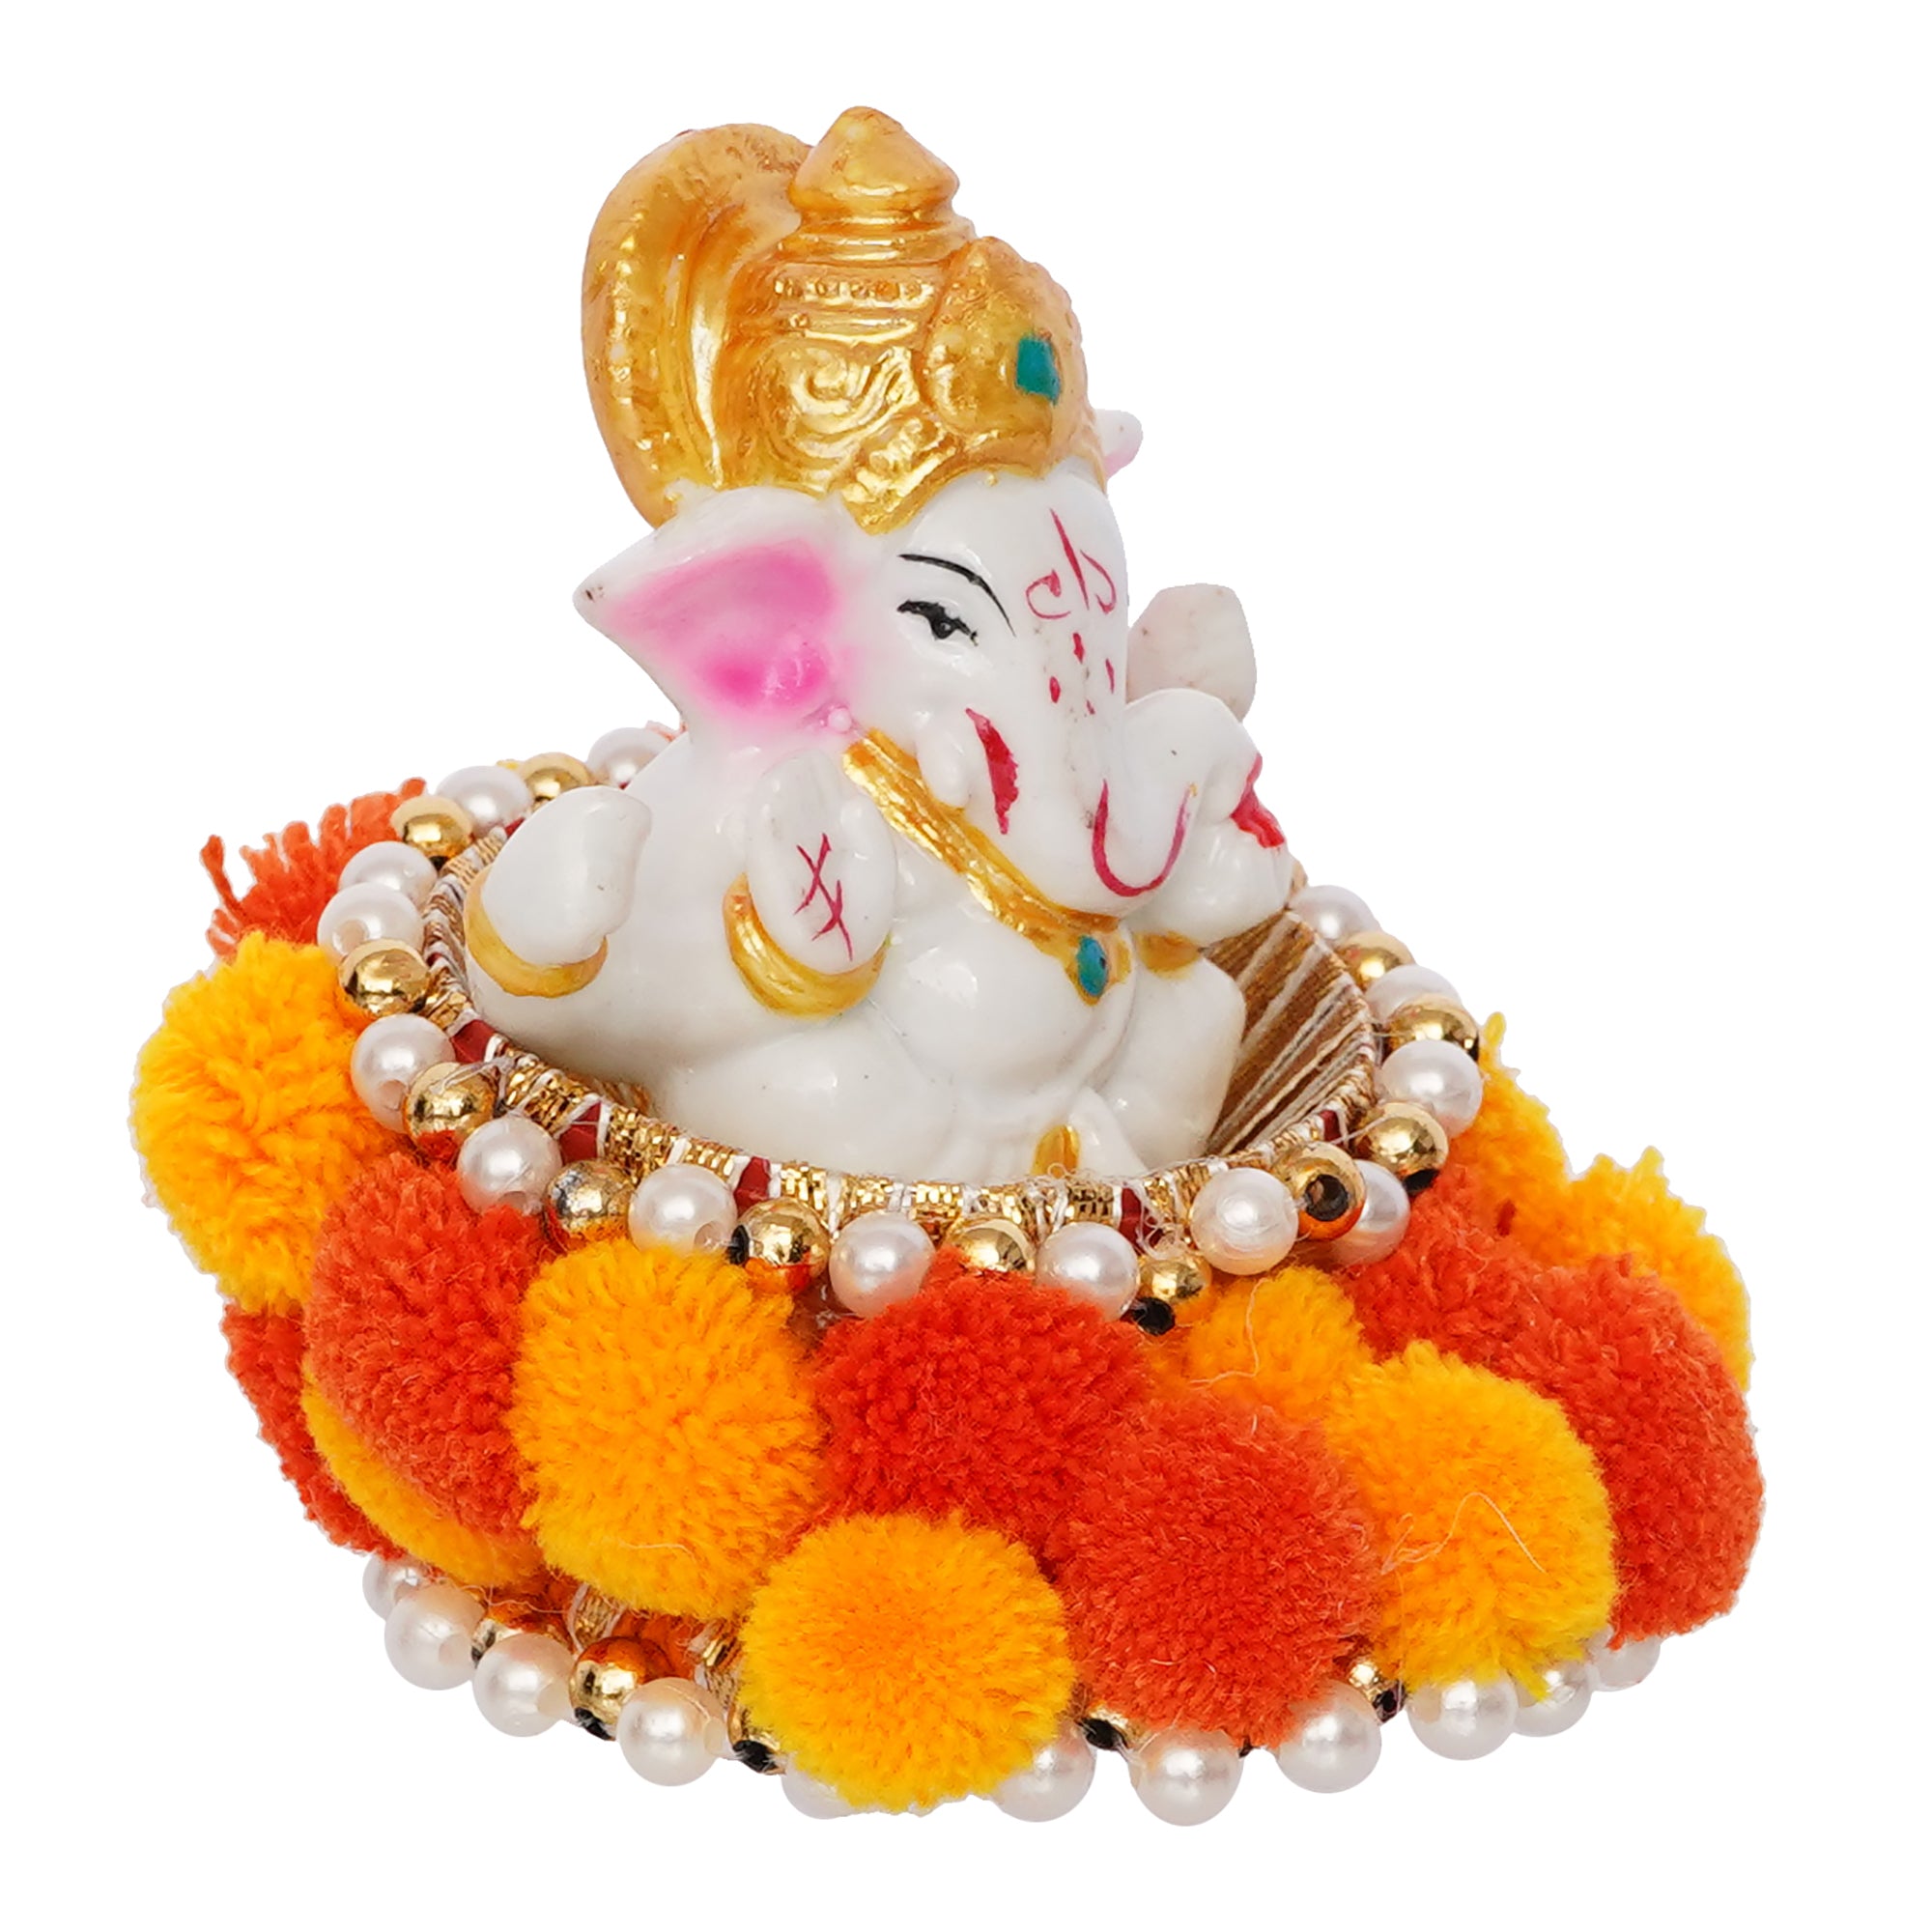 Polyresin Lord Ganesha Idol on Decorative Handcrafted Floral Plate for Home and Car Dashboard 2